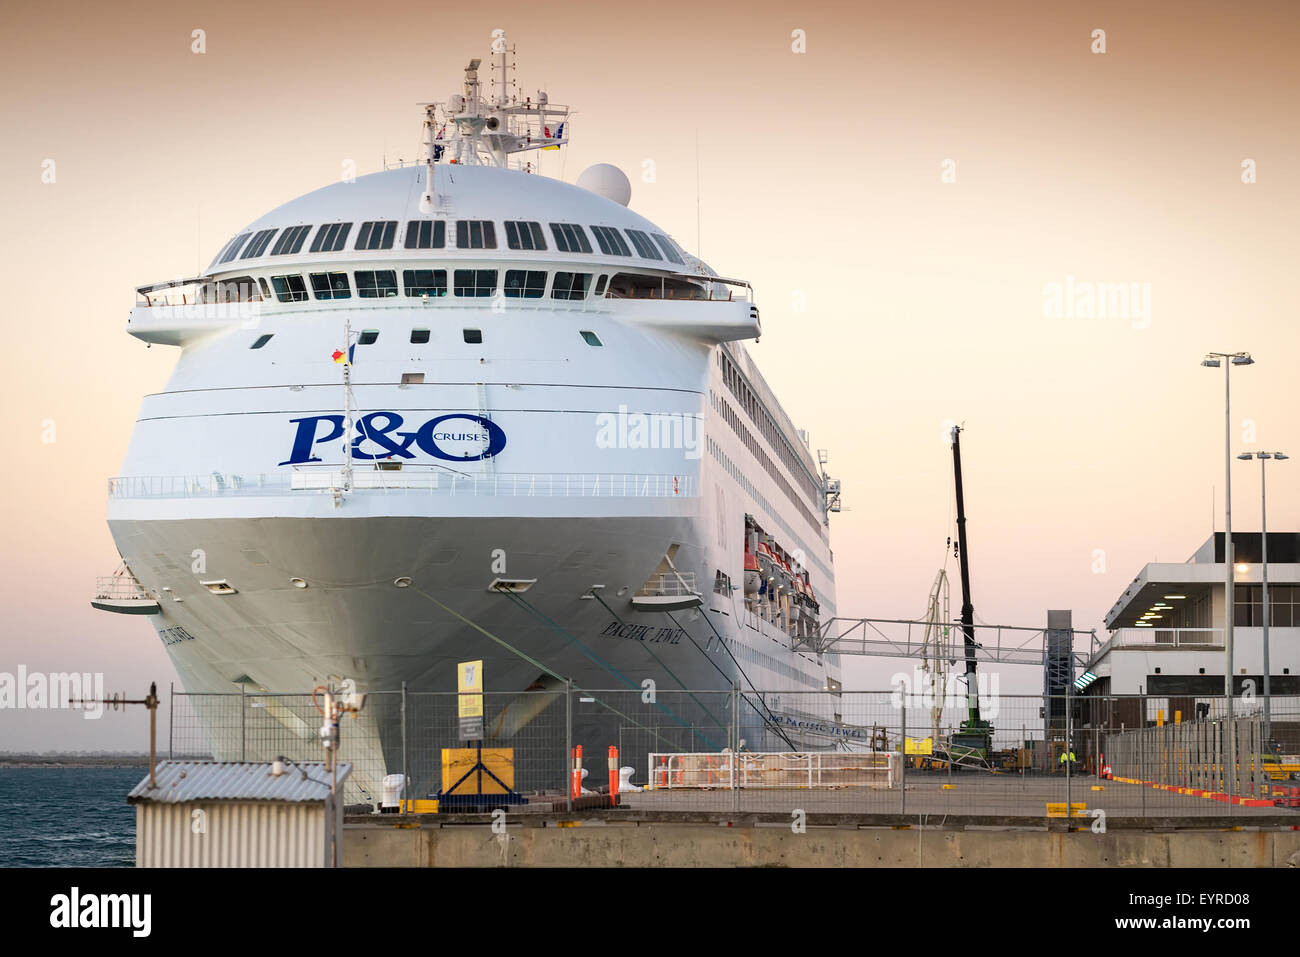 Adelaide, Australia - March 5, 2015: P&O Pacific Jewel cruise ship is docked at Port Adelaide to pick up passengers Stock Photo